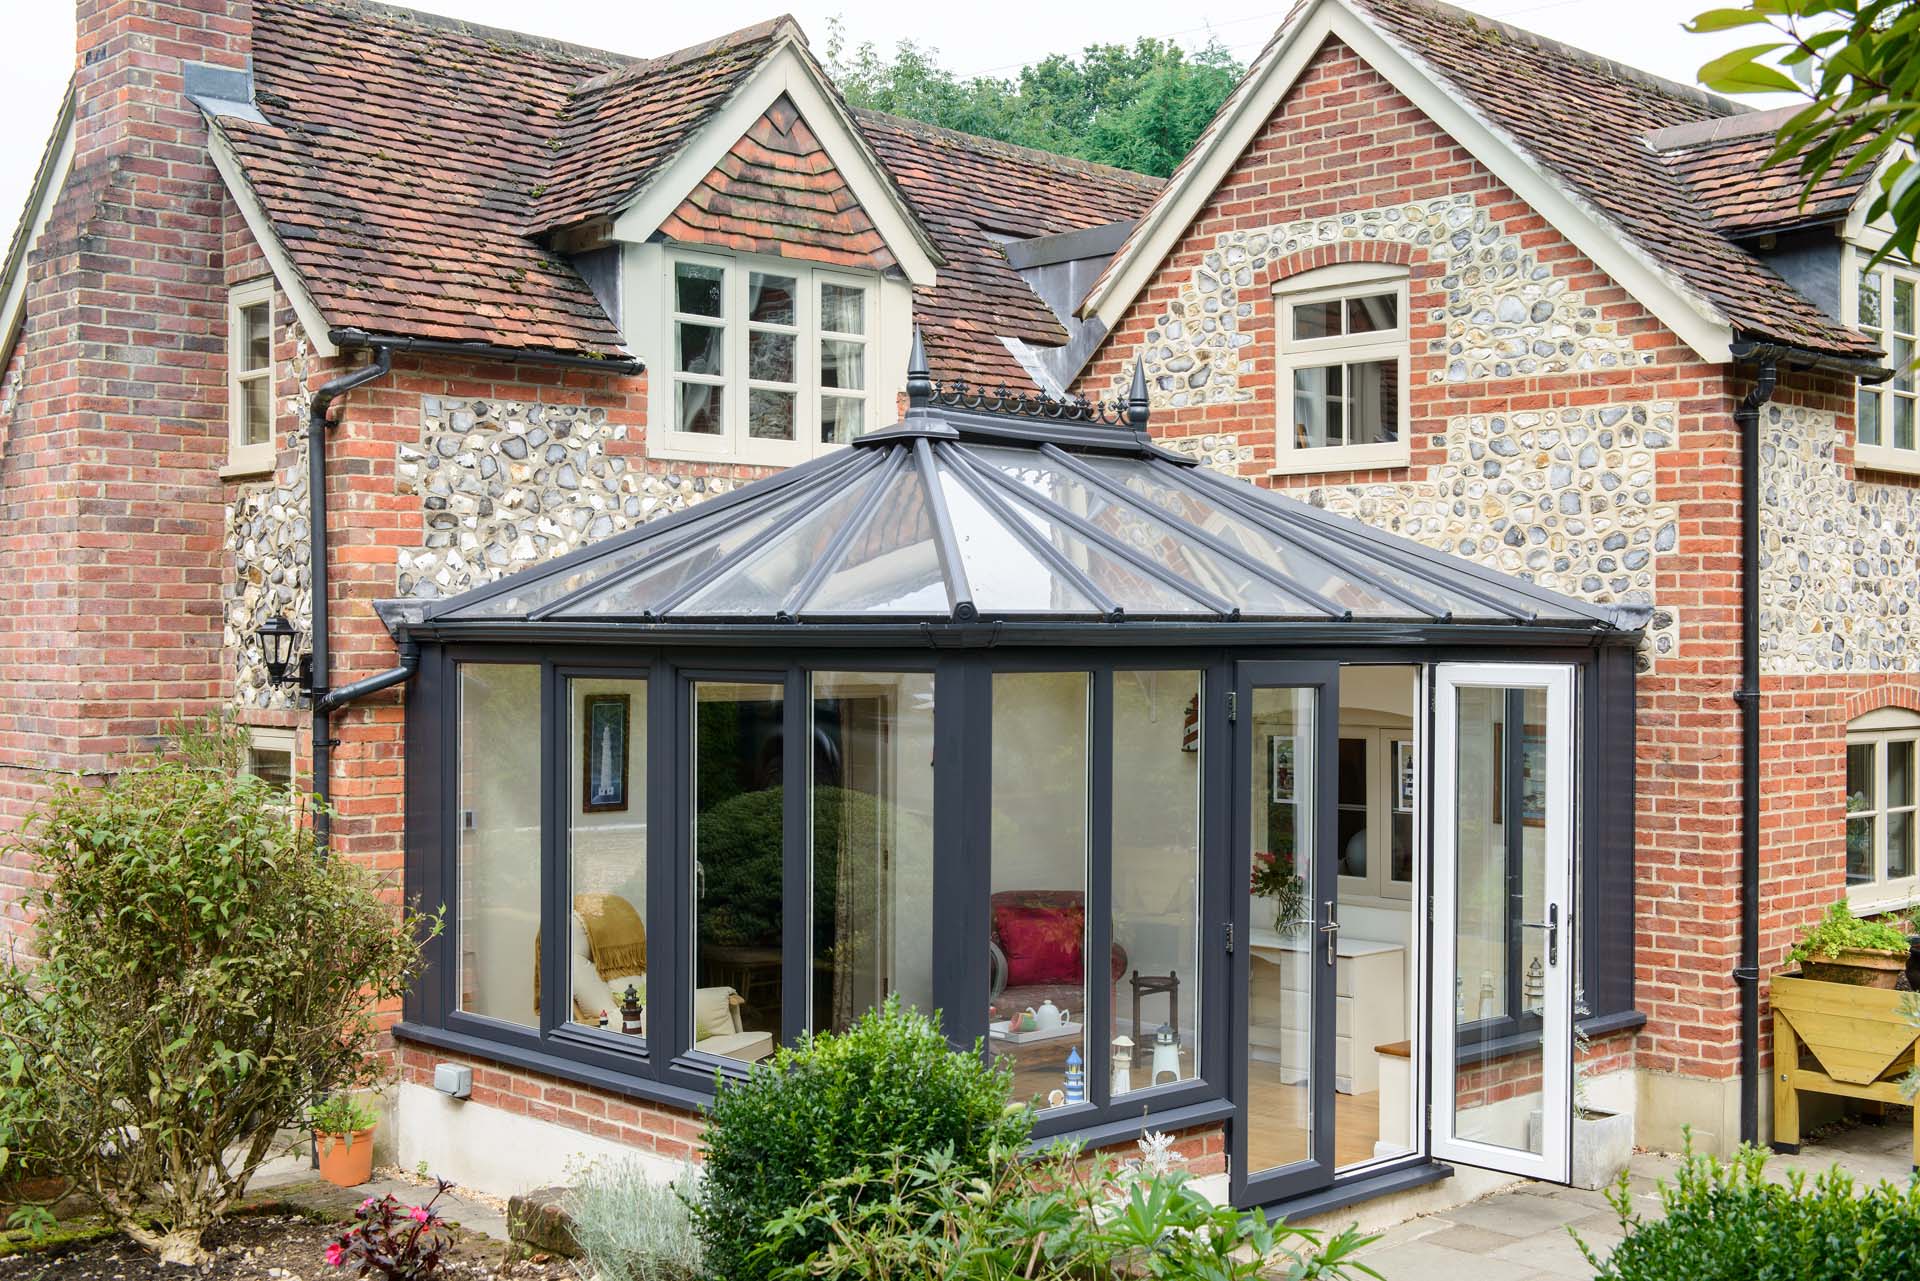 A conservatory with a roof designed to reflect heat